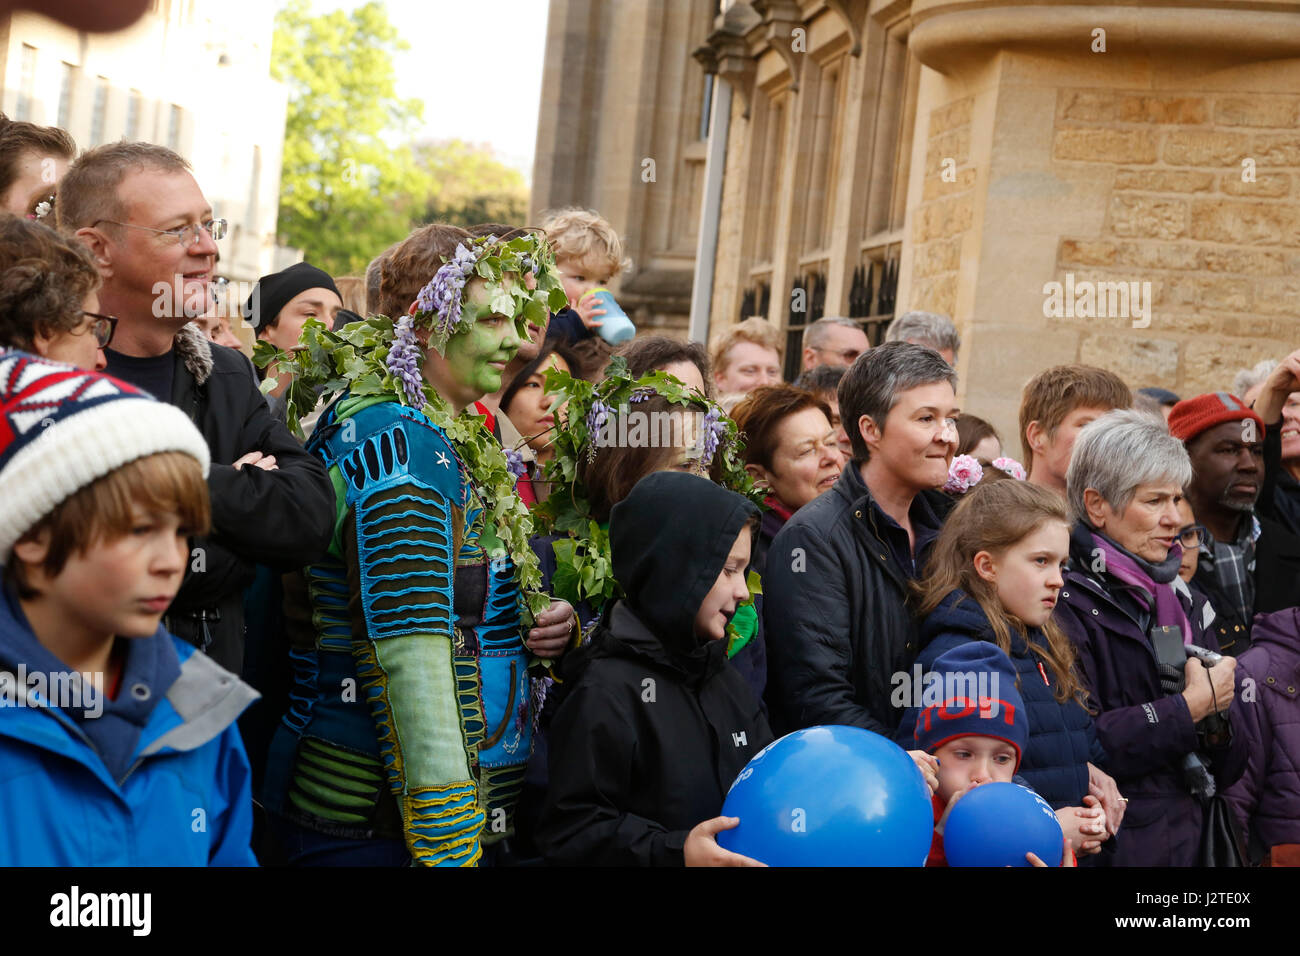 Oxford, UK. 1st May, 2017. Crowds celebrate May morning in Oxford, dressing up, decorating their hats with flowers and some paint their faces green to emulate the green amn. Crowds watch the Morris men dance in front of Hertford College's Bridge of Sighs with the sun rising behind the bridge. May morning is traditionally celebrated in Oxford with a choir singing from the top of Magdalen College Tower after which the crowds are lead through the streets by Morris men who perform at various sites throughout the city. Credit: Jill Walker/Alamy Live News Stock Photo